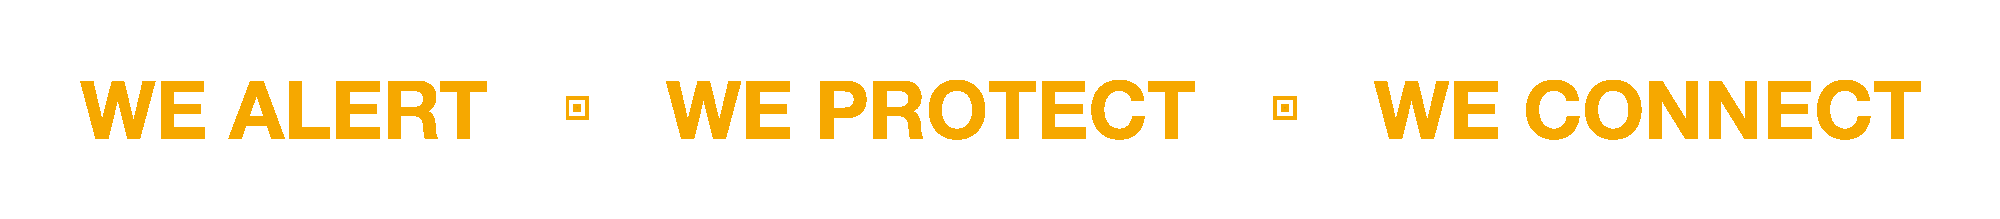 we alert we protect we conncet